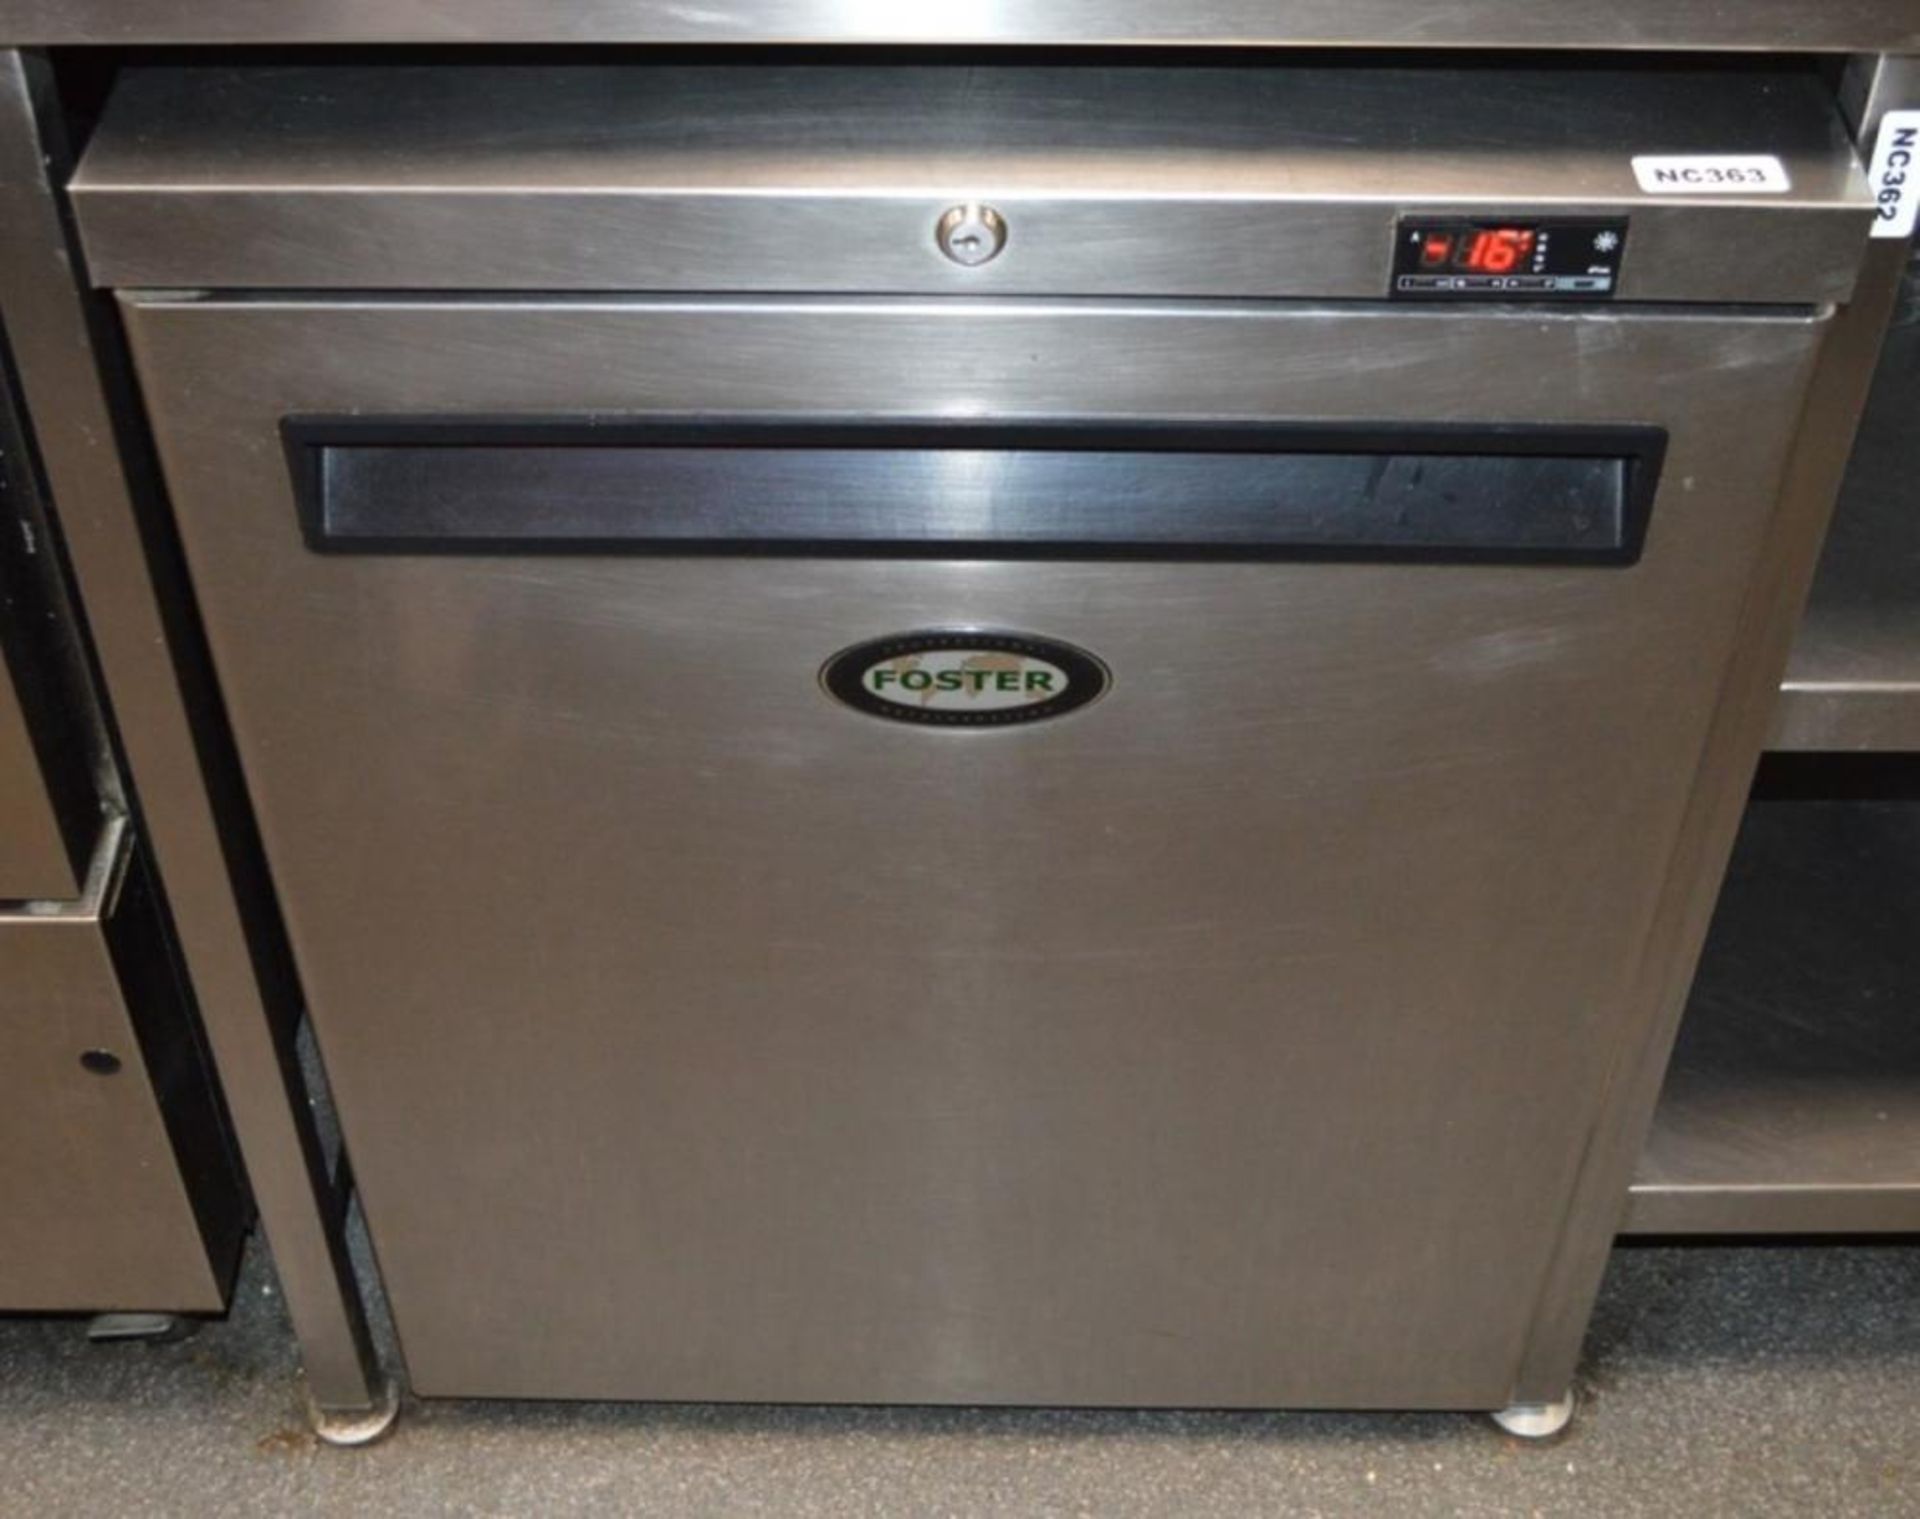 1 x Foster Undercounter Single Door Freezer With Stainless Steel Finish - Model LR150-A - H80 x